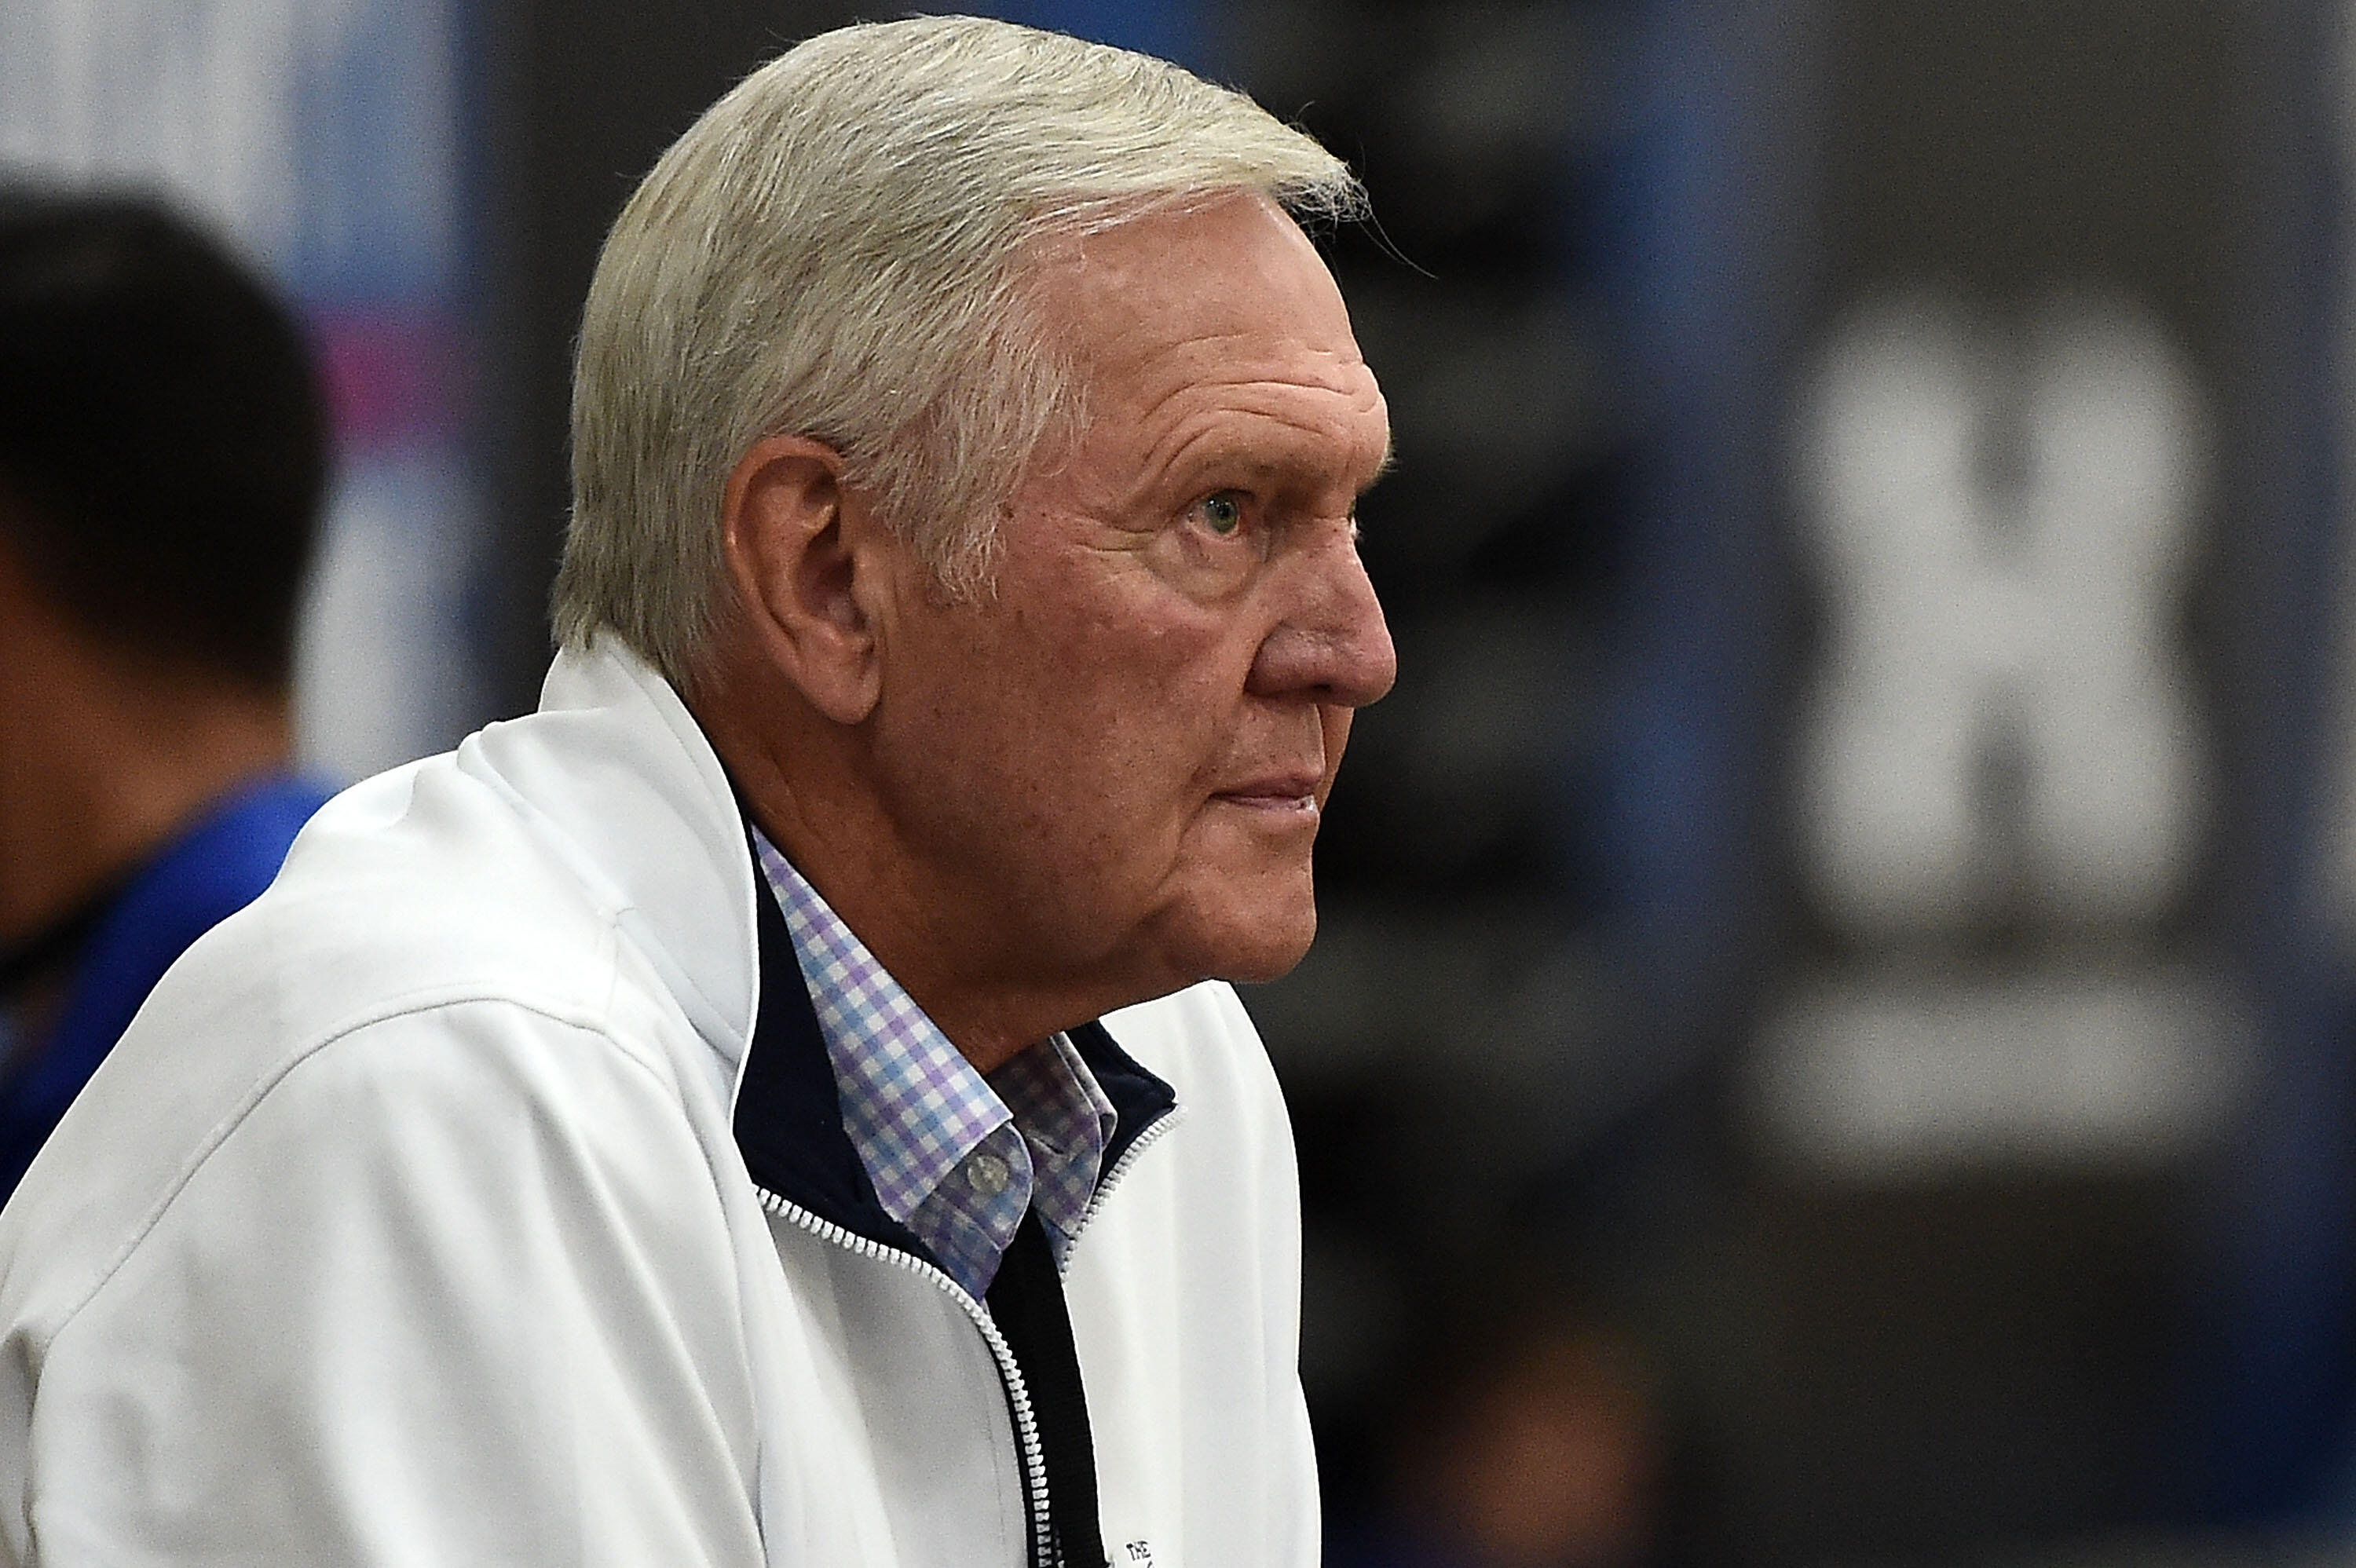 CHICAGO, IL - MAY 12:  NBA Hall of Famer and current executive board member of the Golden State Warriors Jerry West watches action during Day Two of the NBA Draft Combine at Quest MultiSport Complex on May 12, 2017 in Chicago, Illinois.  NOTE TO USER: Use